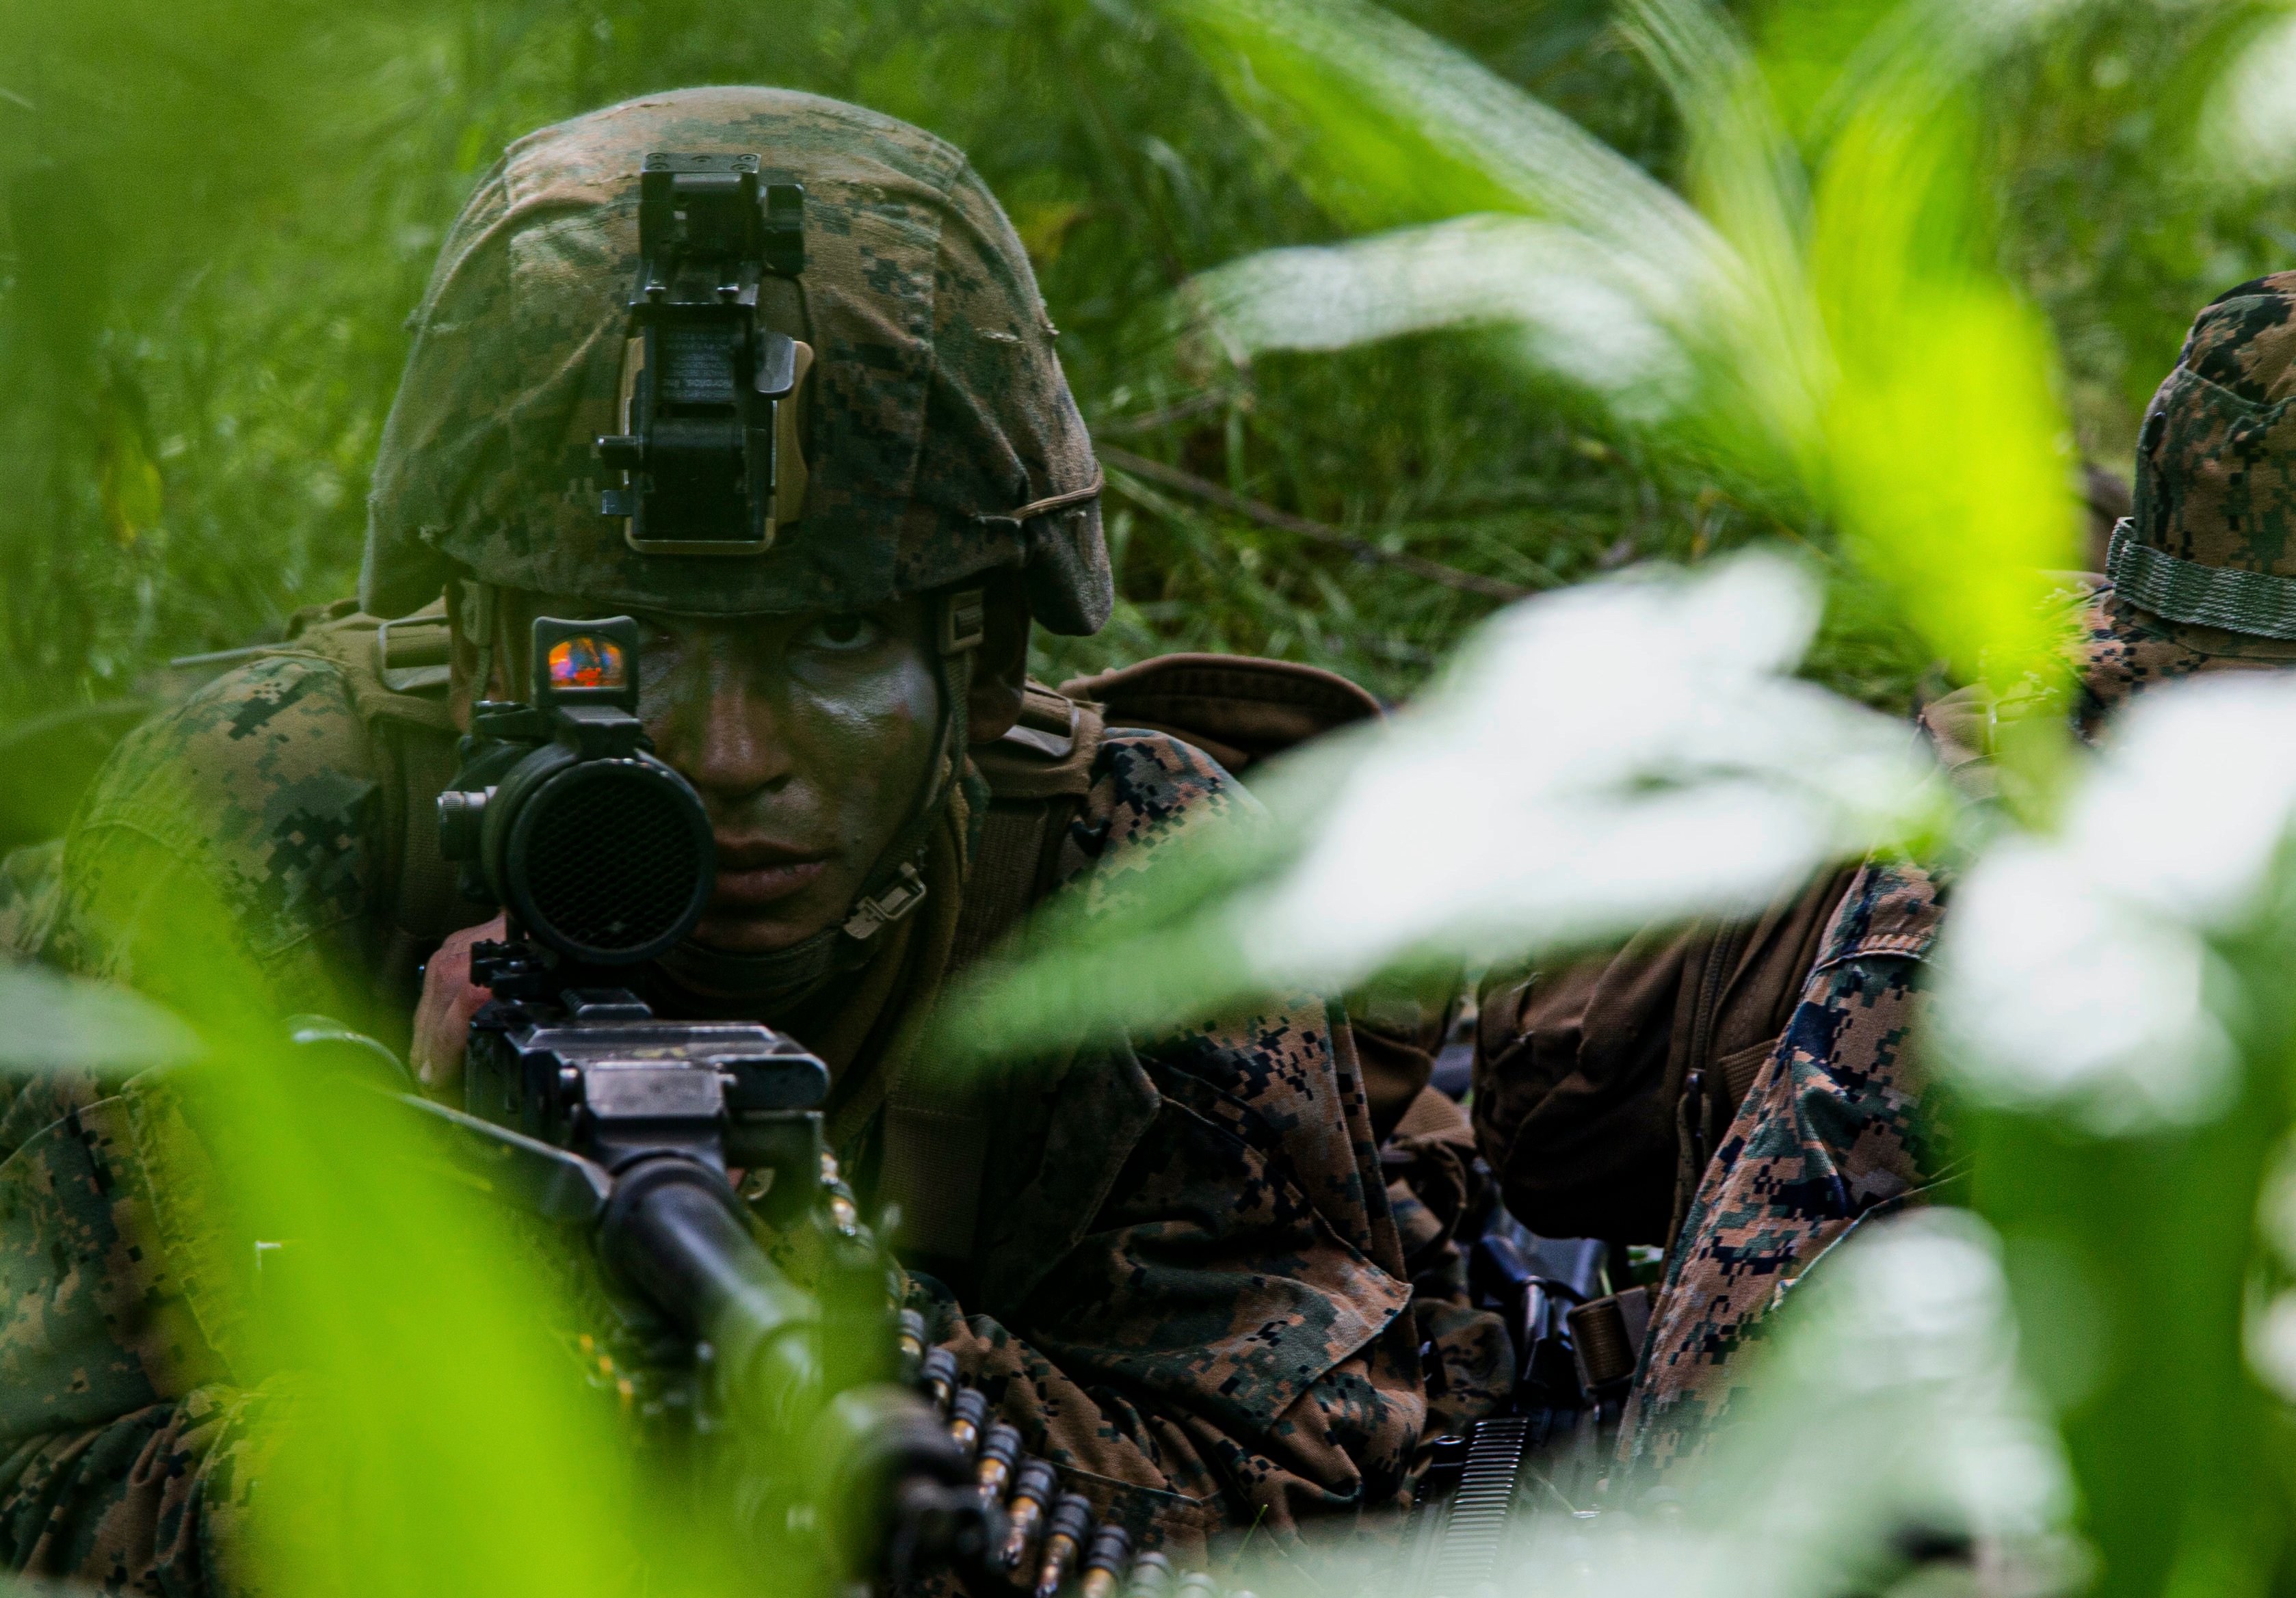 Near-Peer Employment of Snipers - The Company Leader